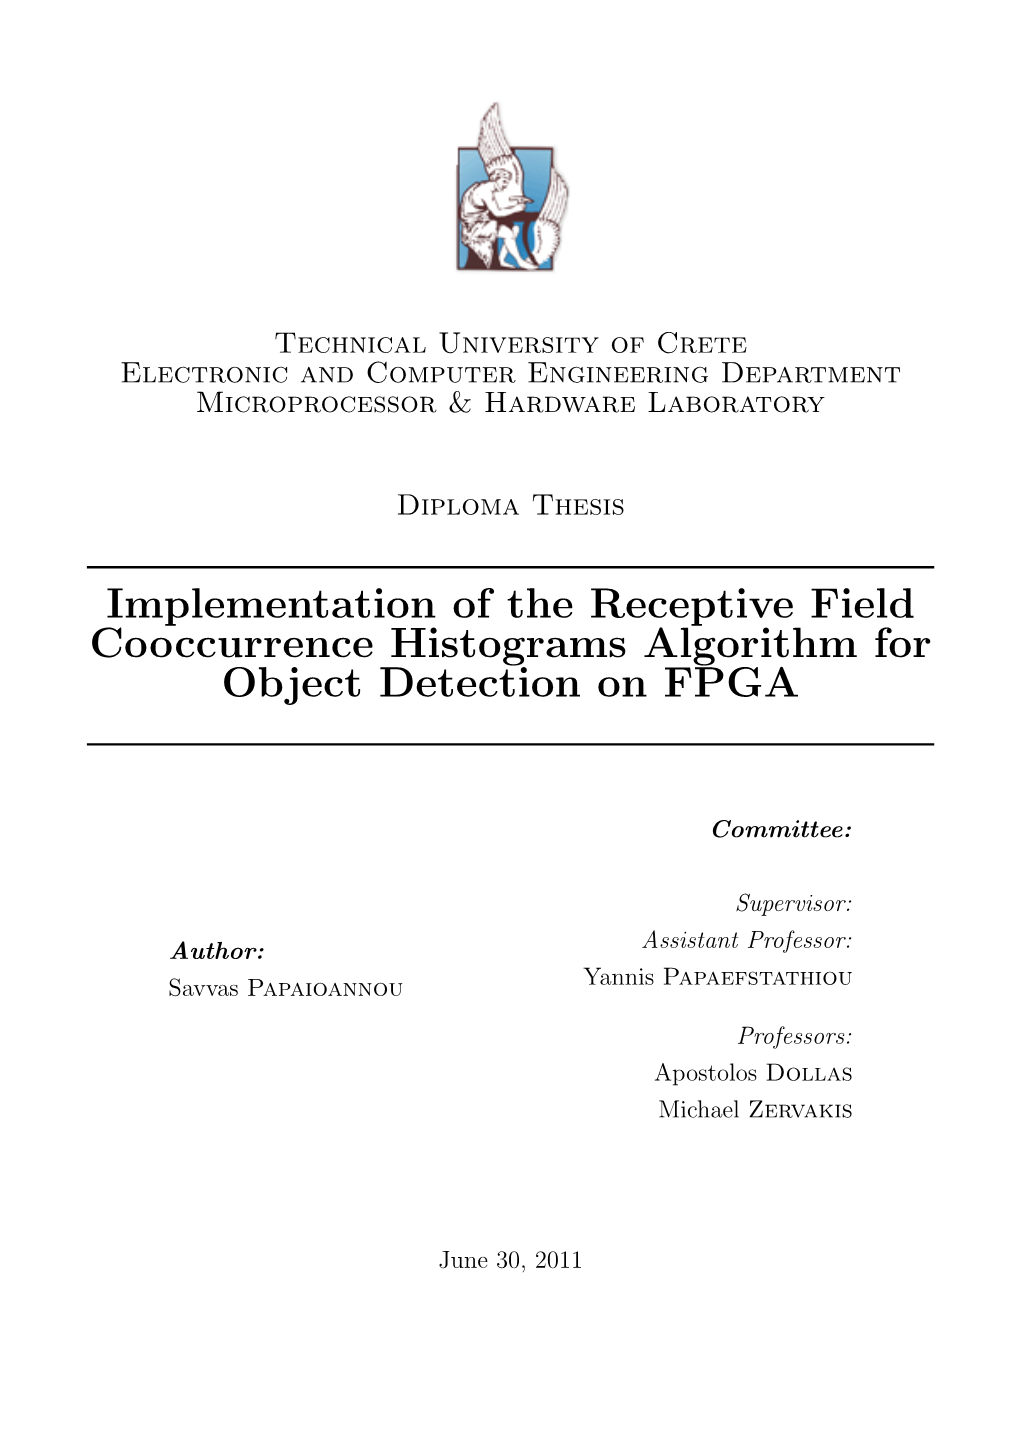 Implementation of the Receptive Field Cooccurrence Histograms Algorithm for Object Detection on FPGA